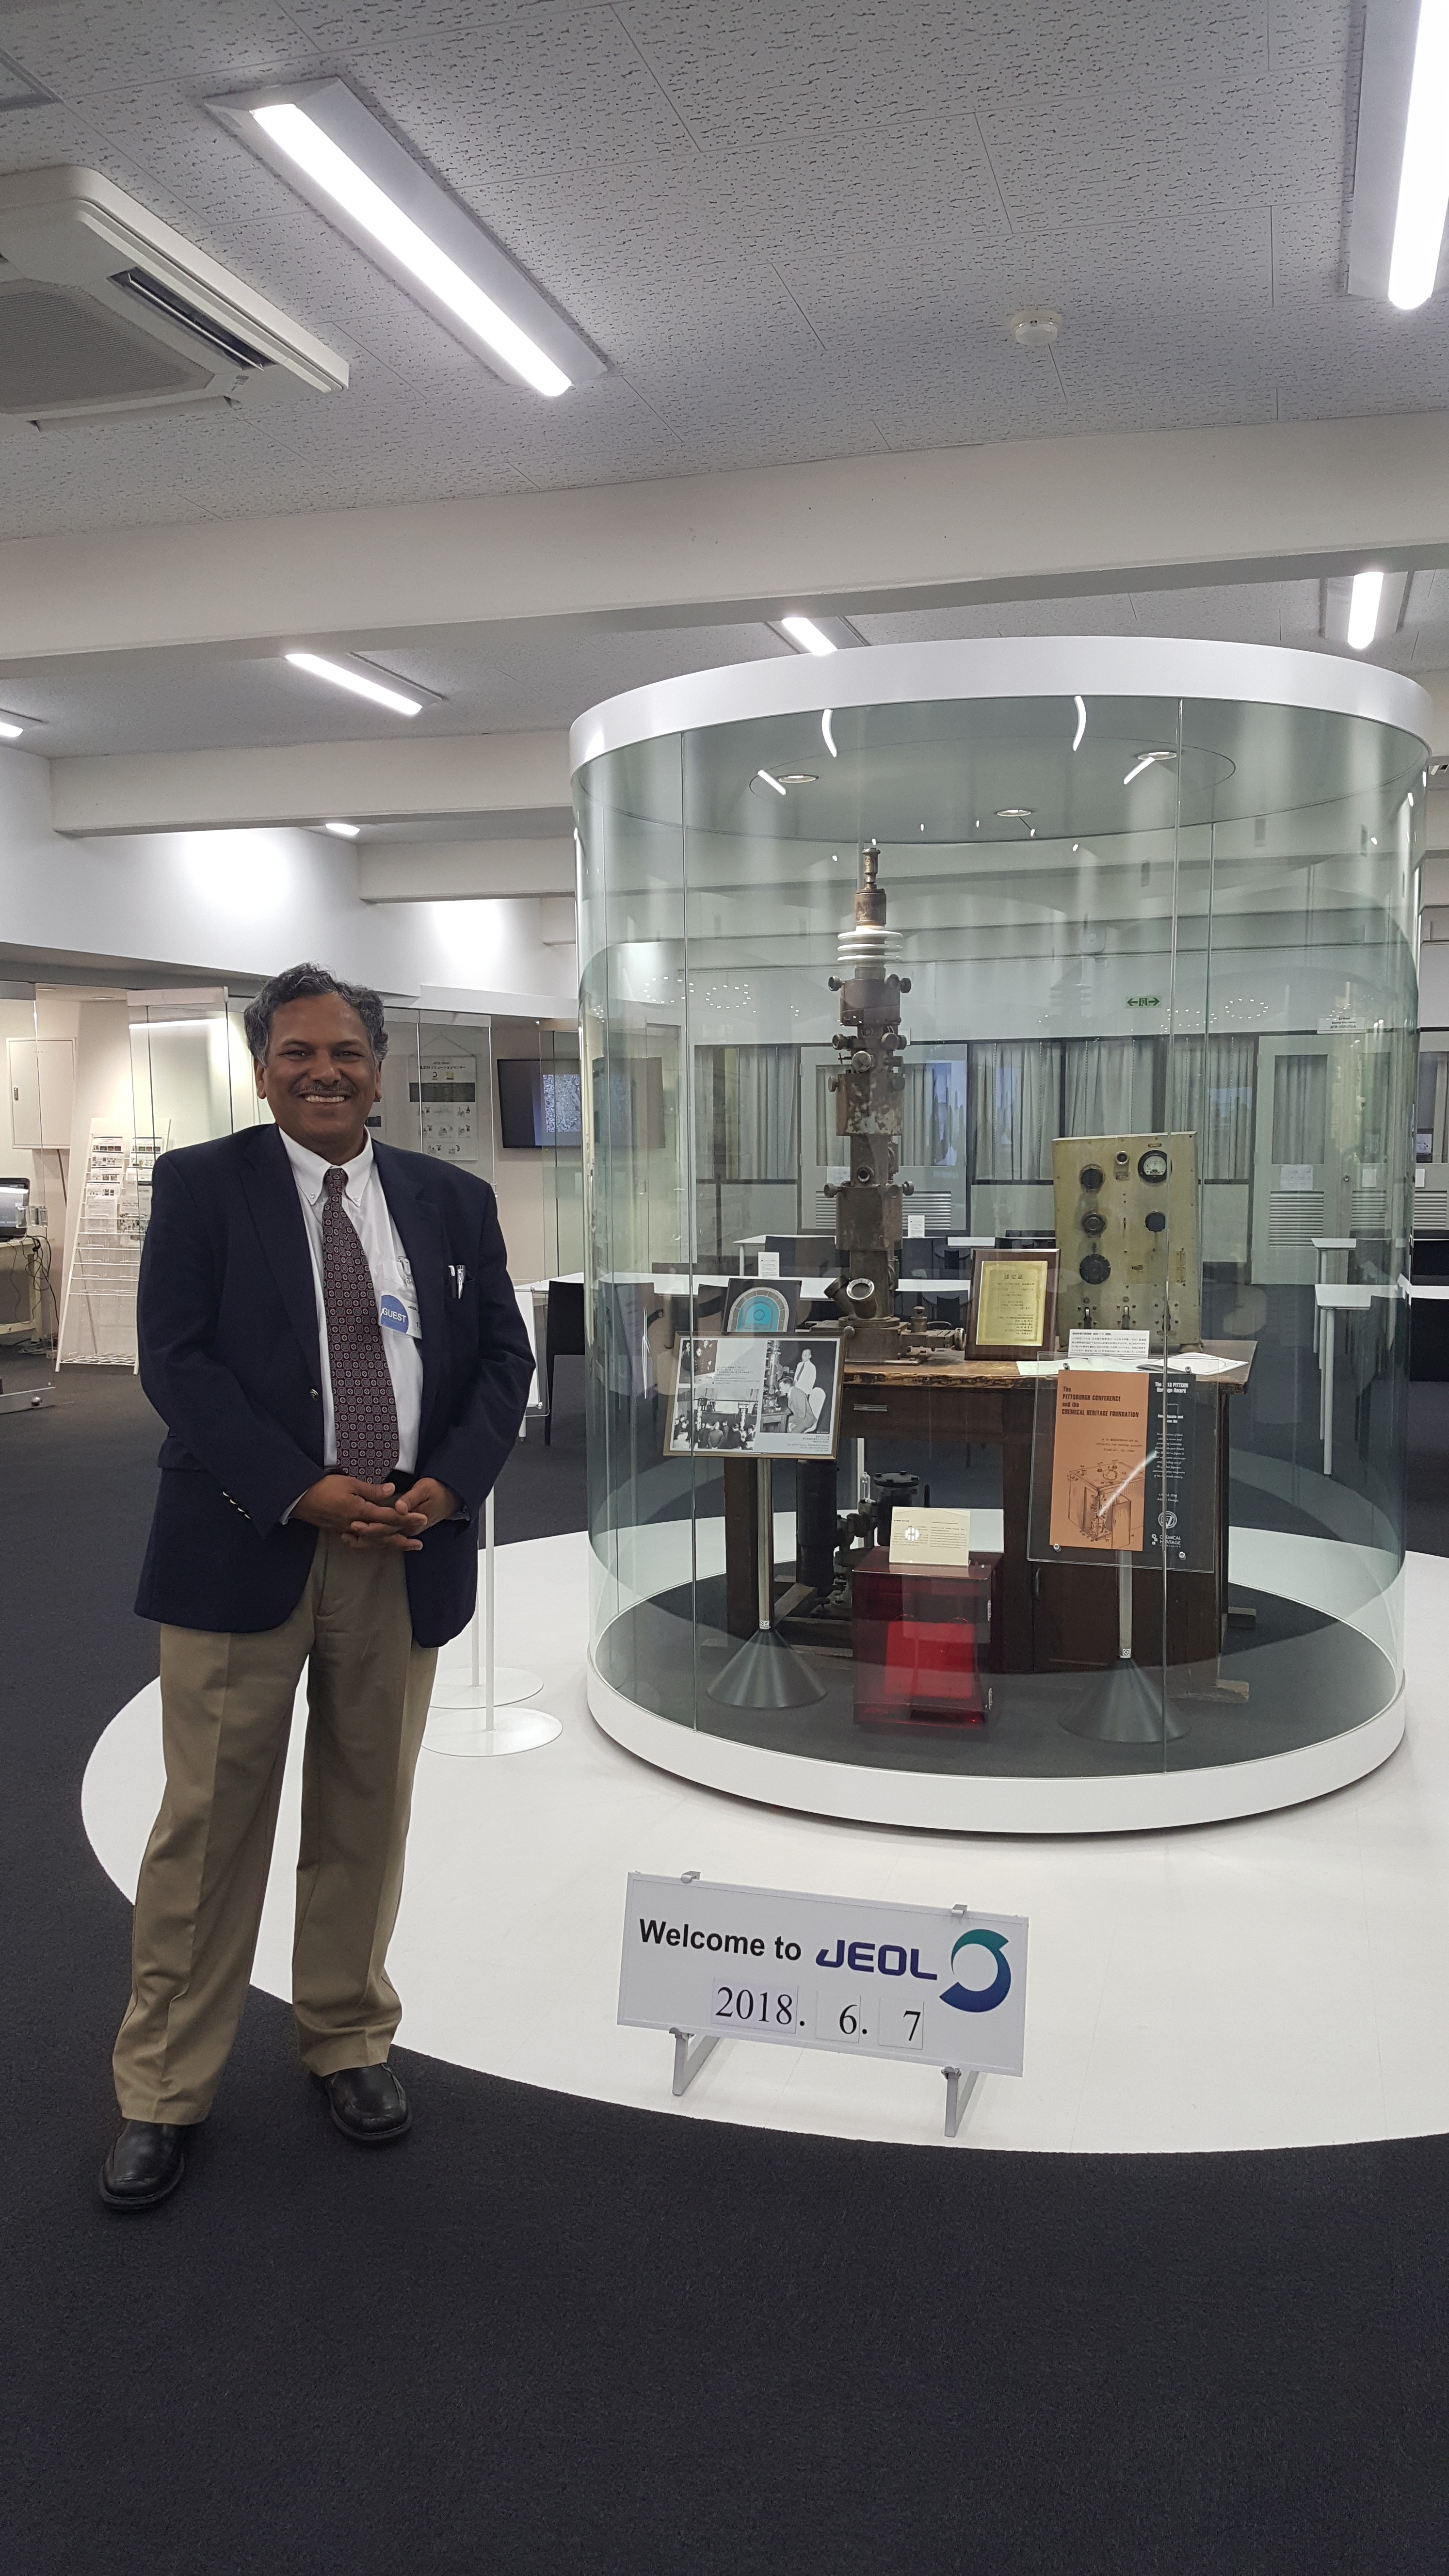 Professor Dravid standing in front of a display at JEOL's headquarters